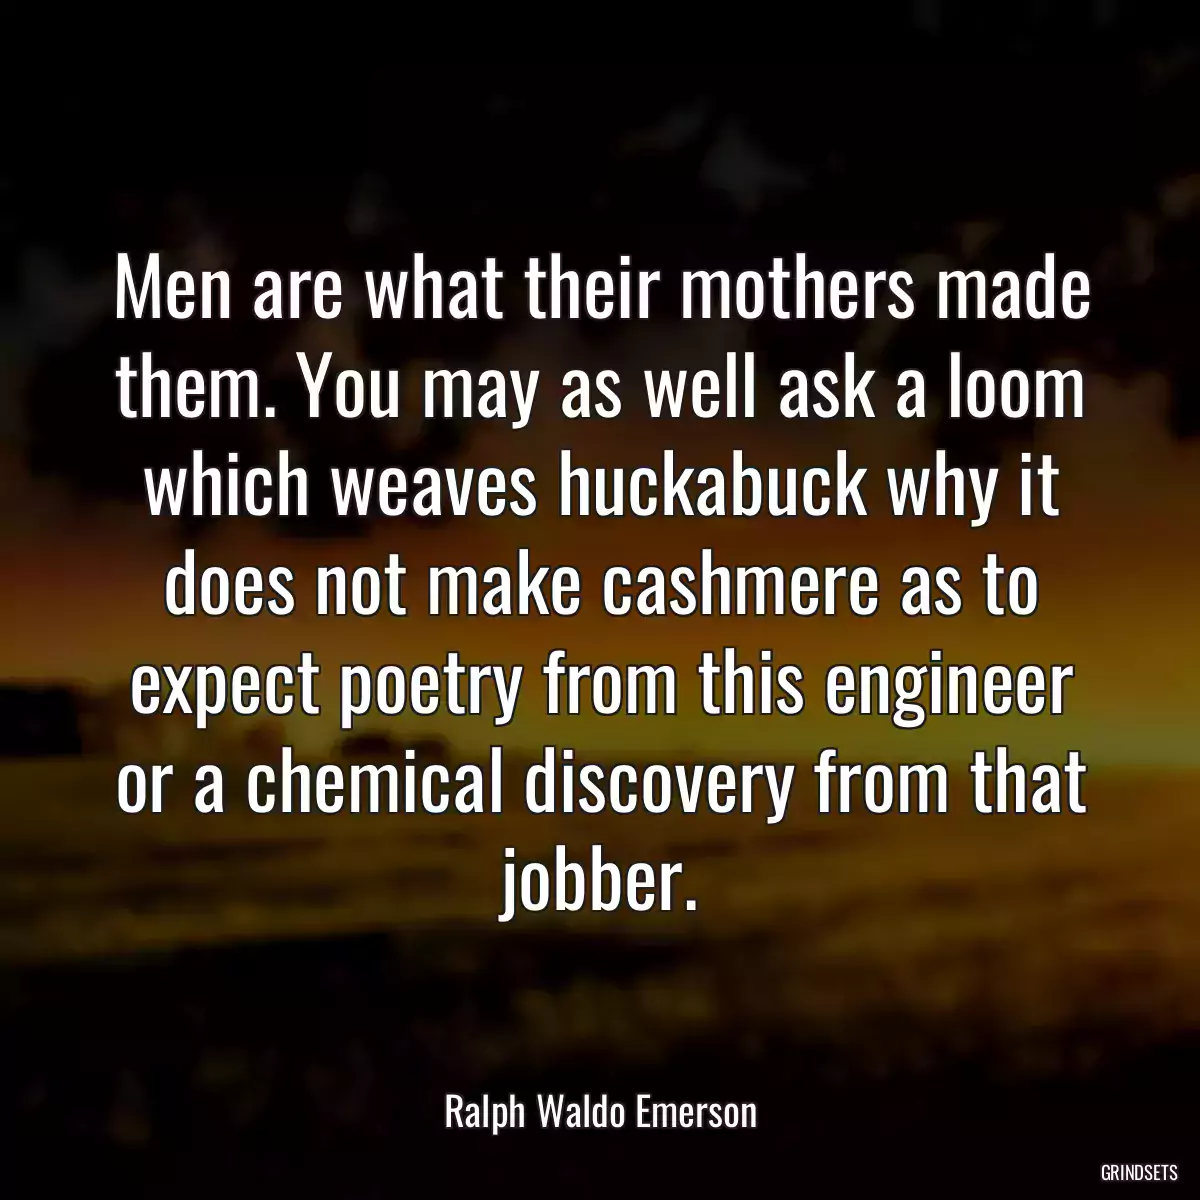 Men are what their mothers made them. You may as well ask a loom which weaves huckabuck why it does not make cashmere as to expect poetry from this engineer or a chemical discovery from that jobber.